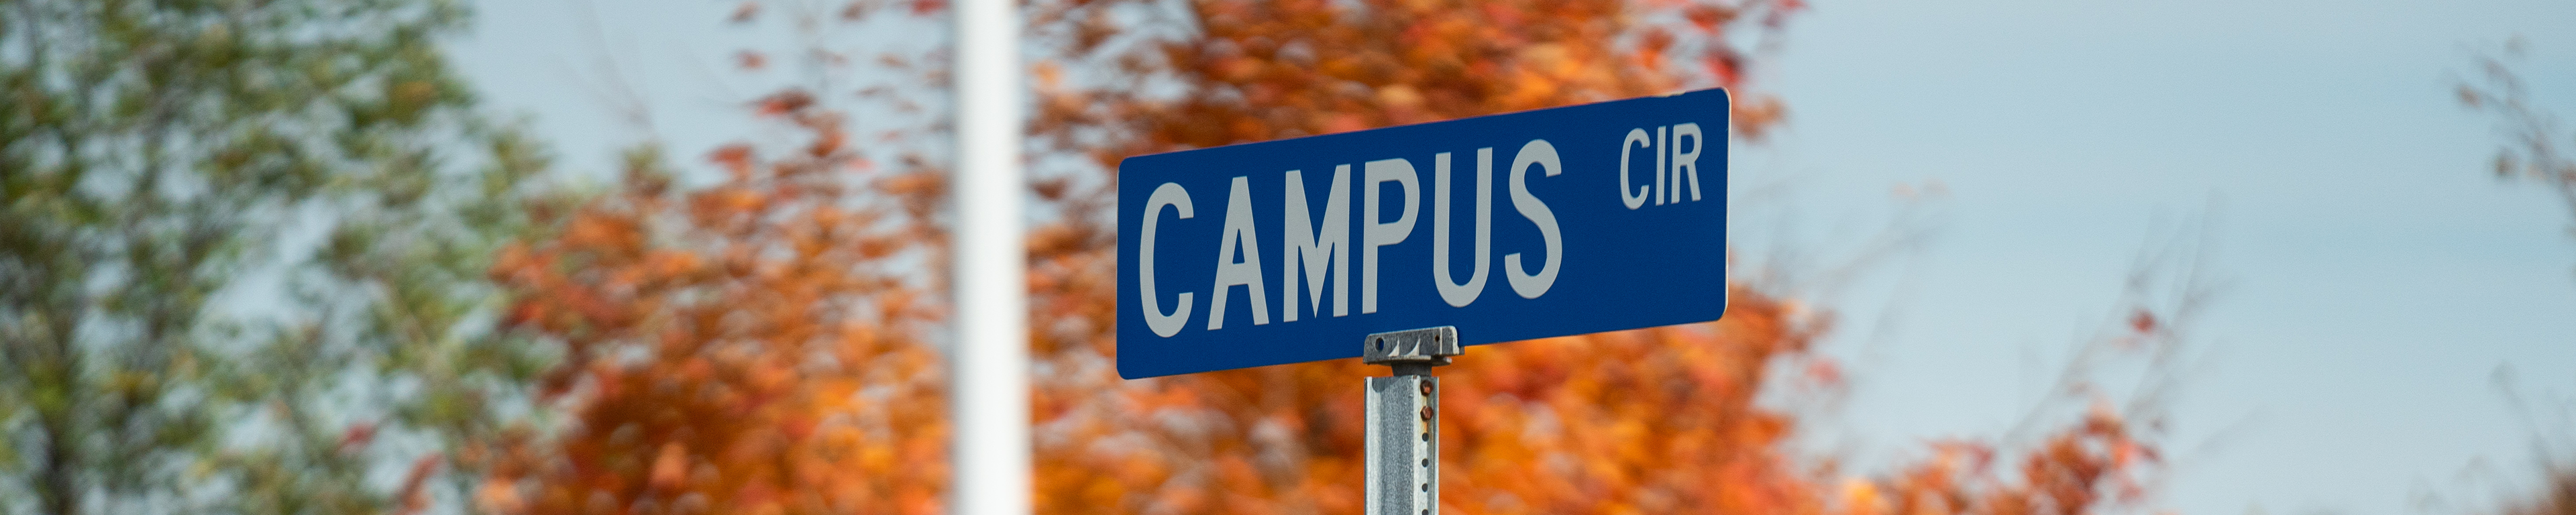 Page banner: Street sign reading "Campus Circle" on WMU campus